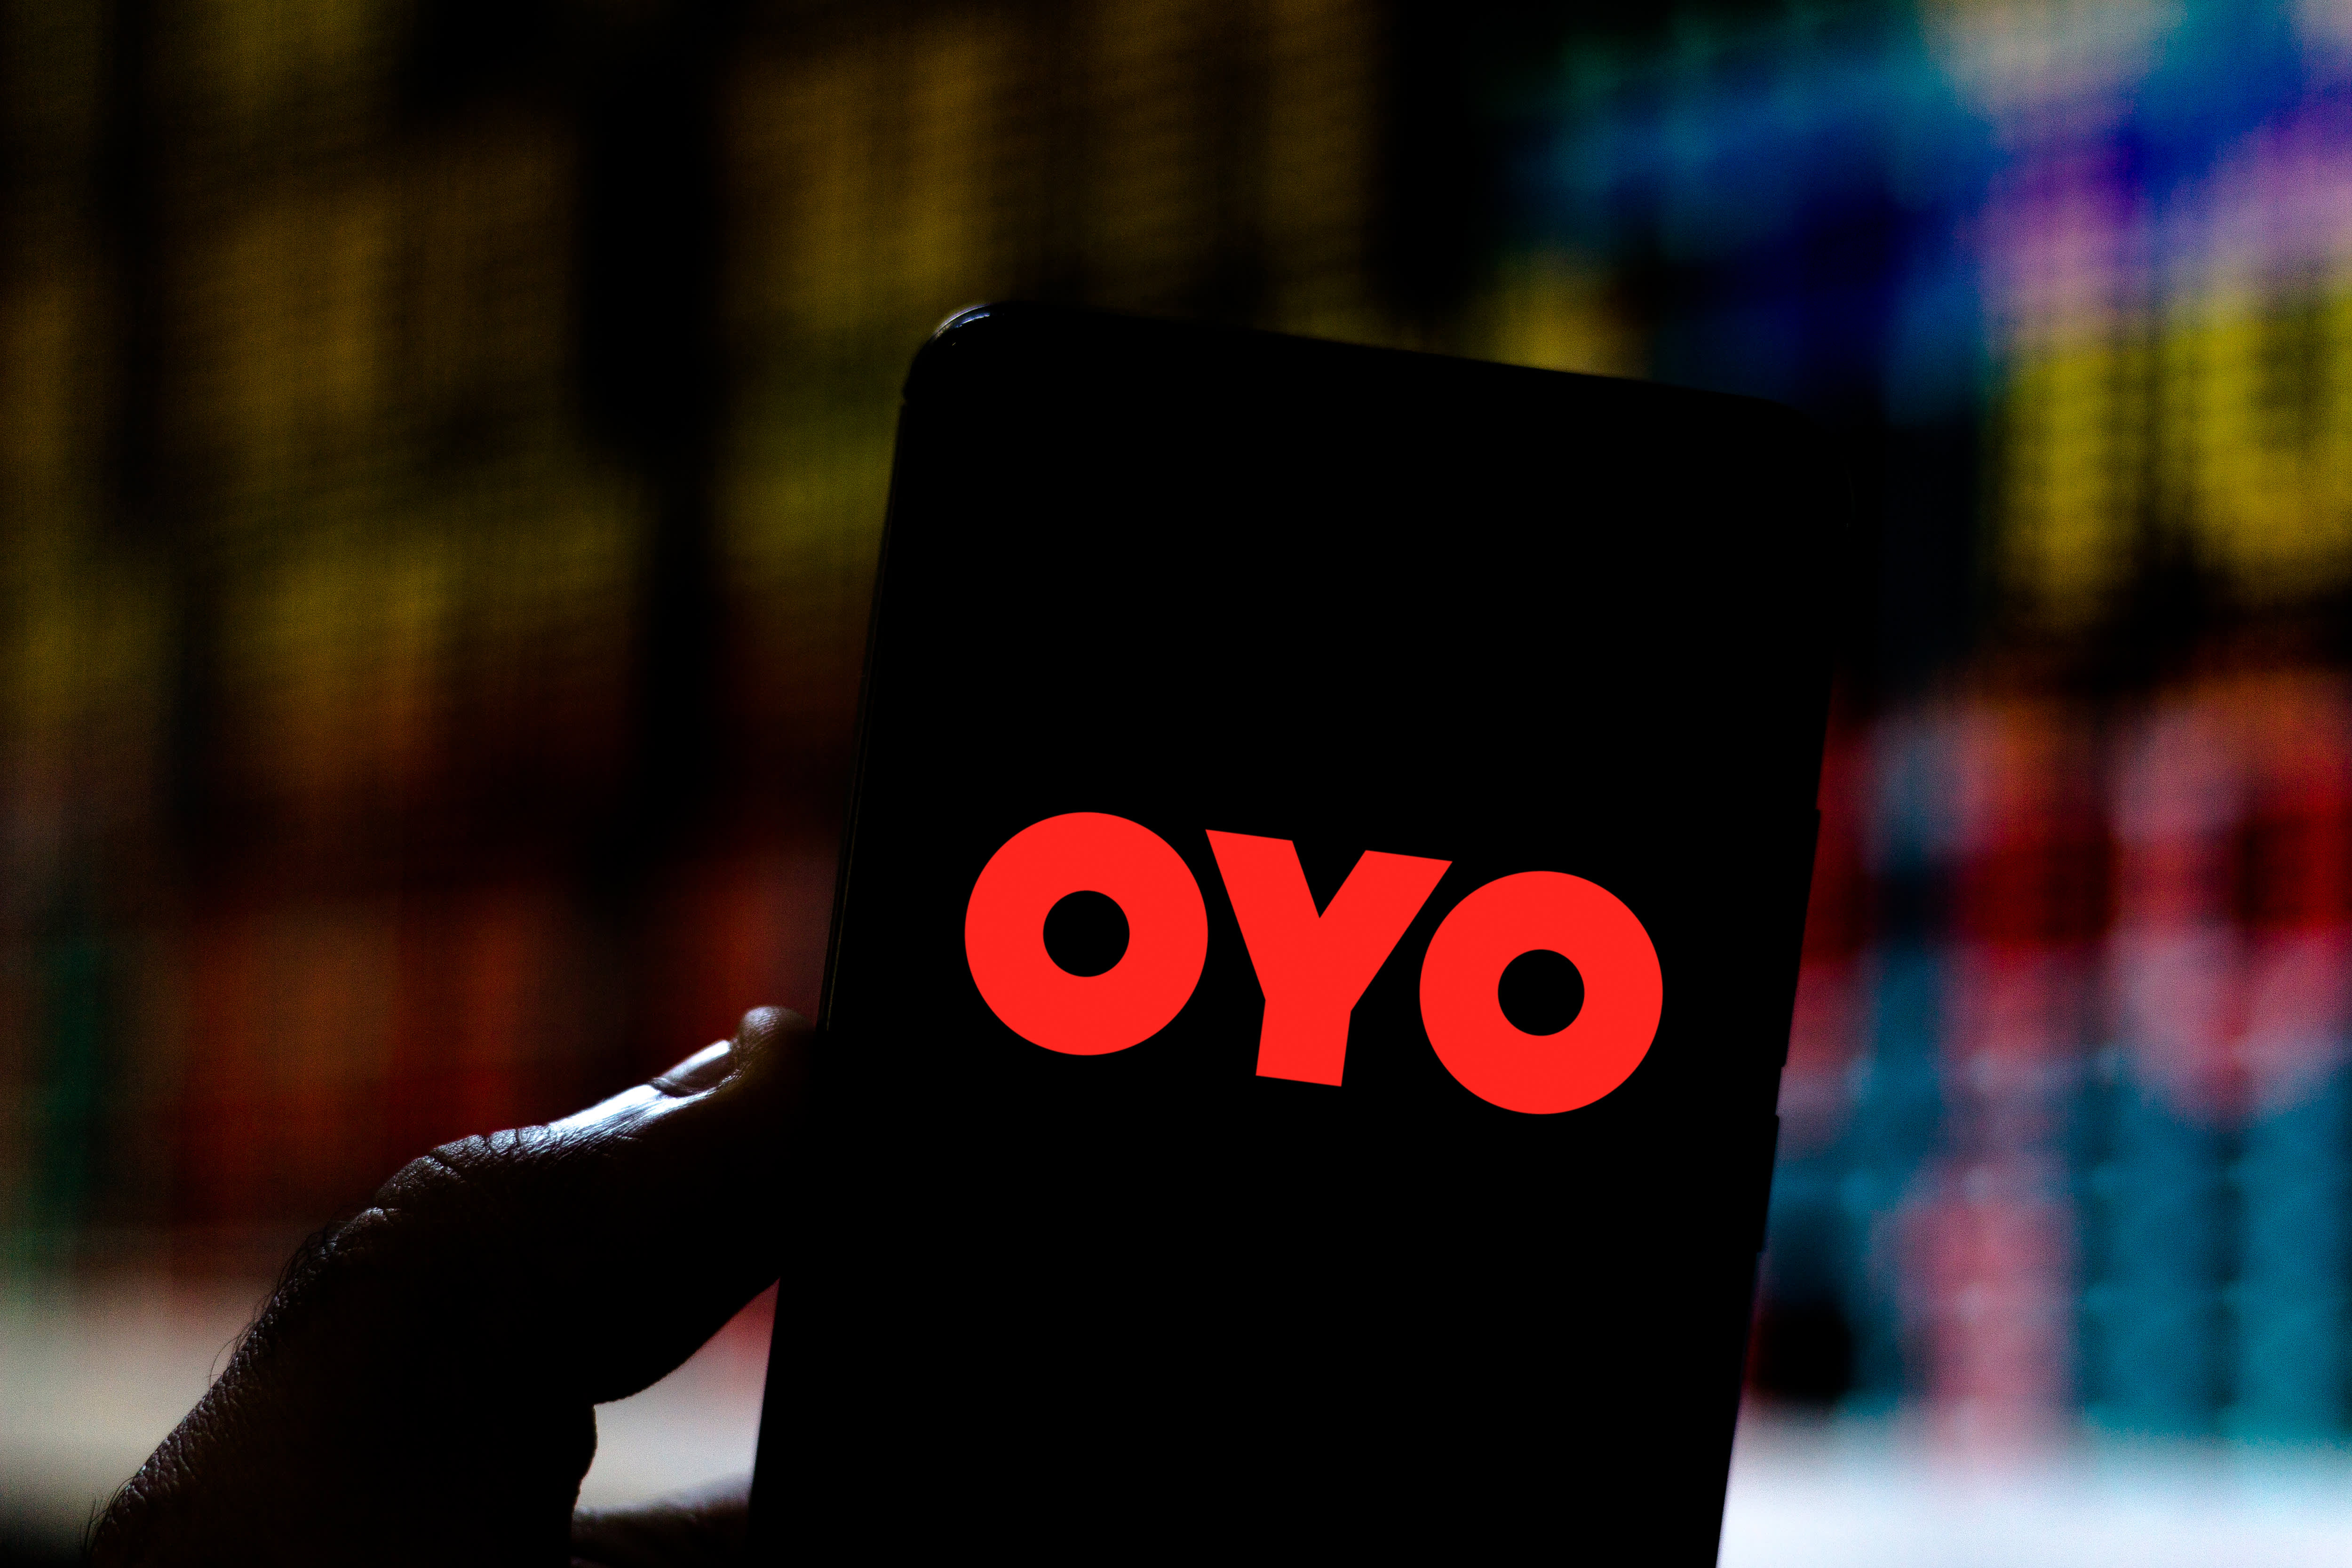 SoftBank-backed Indian start-up Oyo files for $1.2 billion IPO - CNBC